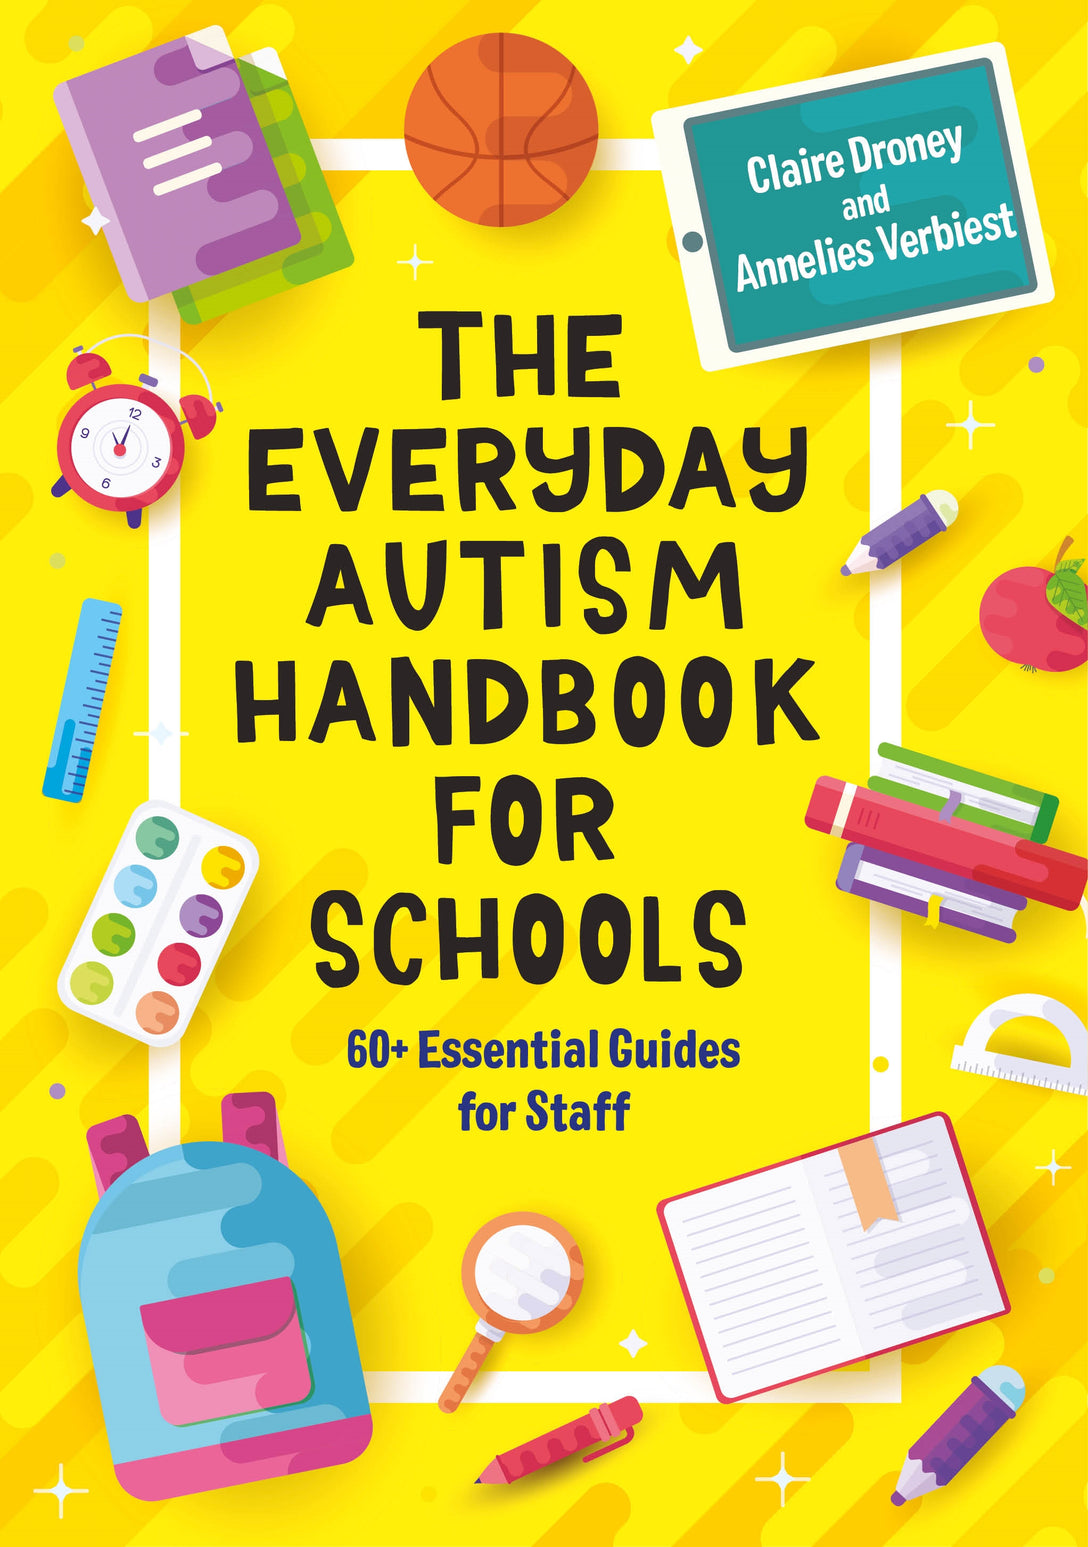 The Everyday Autism Handbook for Schools by Melanie Corr, Claire Droney, Annelies Verbiest